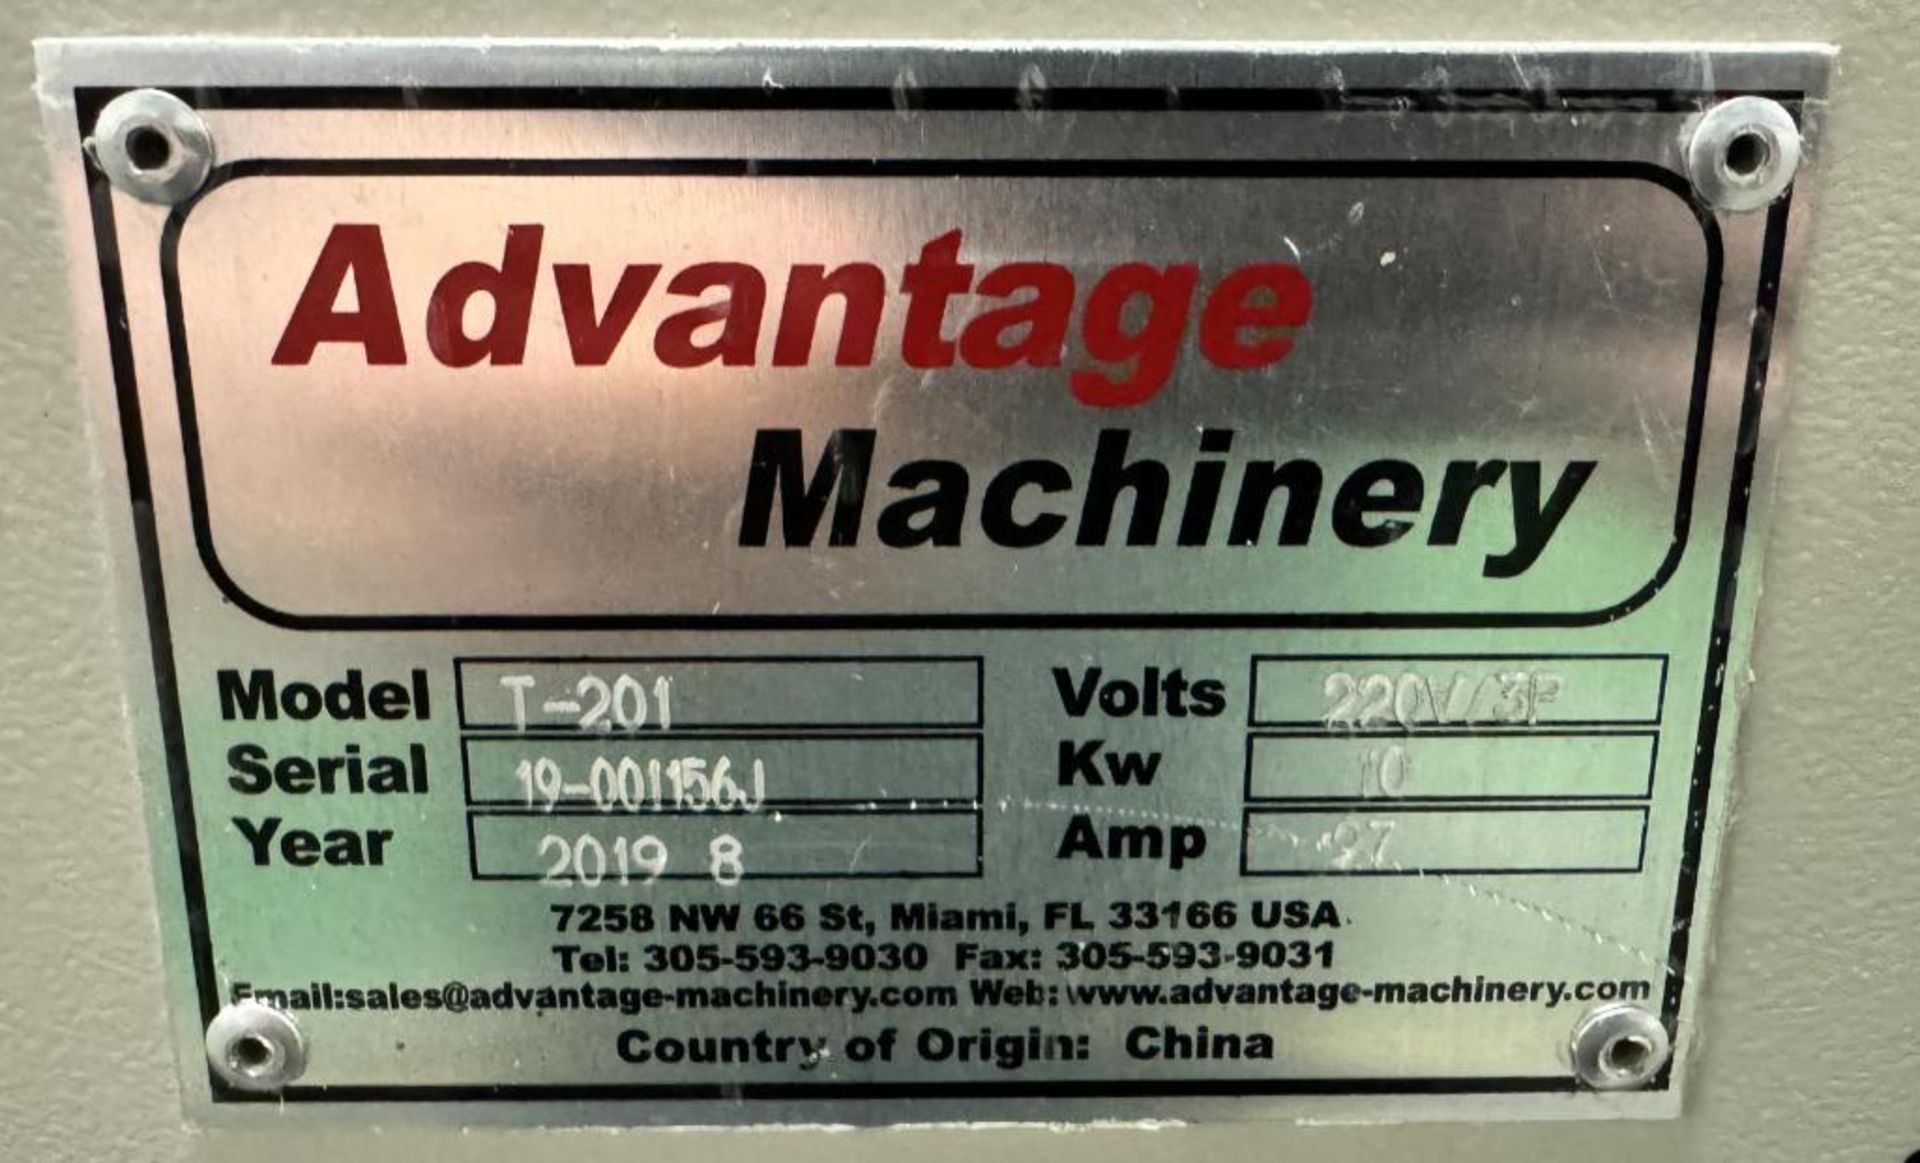 Advantage Machinery L-728 L-Bar Sealing Machine, Serial# 19-001156B, Built 2019. With belted conveyo - Image 18 of 18